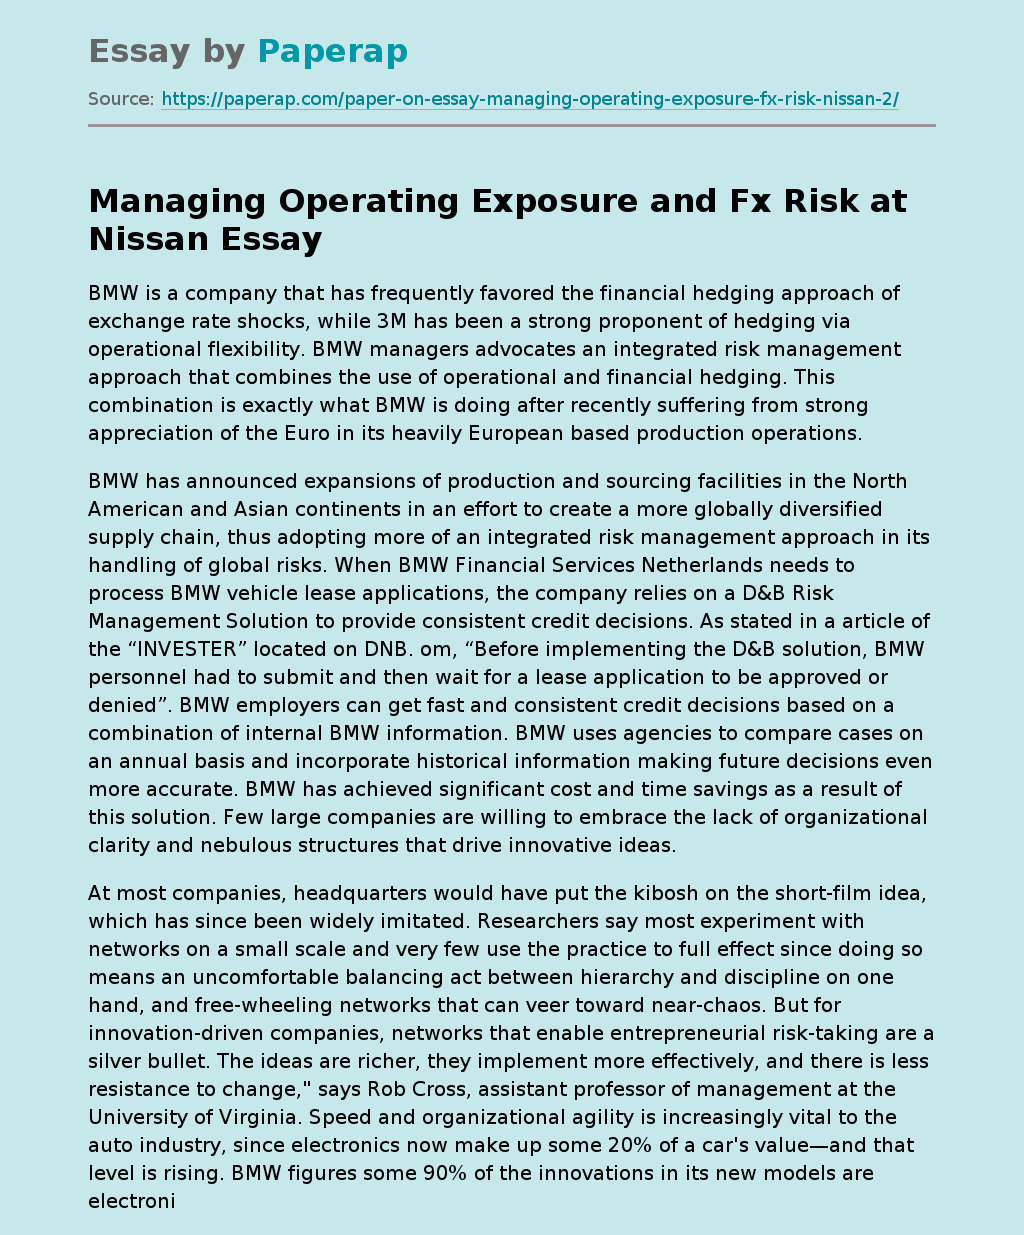 Managing Operating Exposure and Fx Risk at Nissan